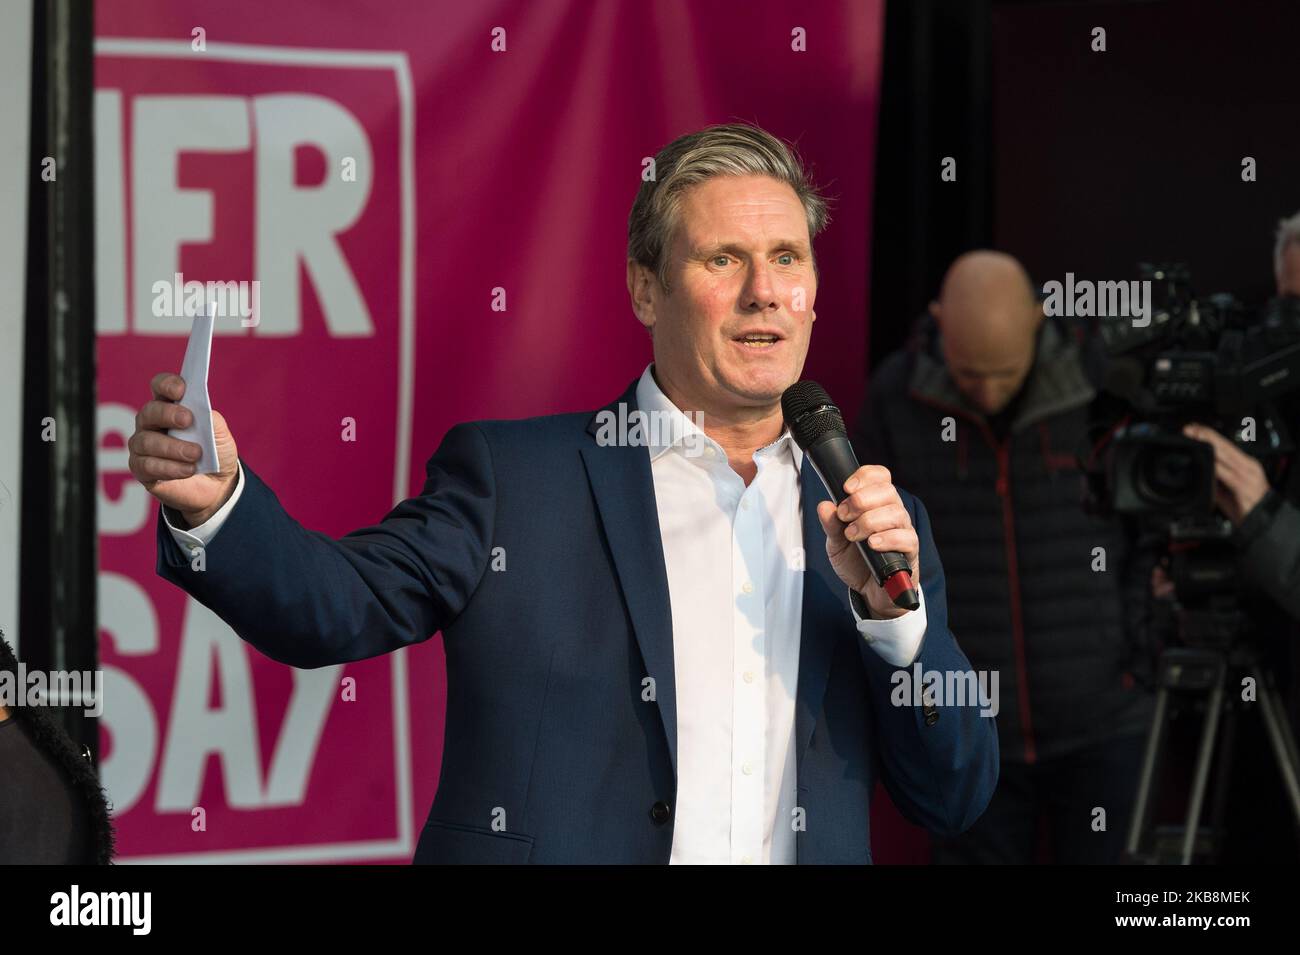 Shadow Brexit Secretary Keir Starmer speaks during a rally in Parliament Square as hundreds of thousands of people take part in the anti-Brexit 'Together for the Final Say' march through central London to demand a public vote on the outcome of Brexit on 19 October, 2019 in London, England. The demonstration coincides with an emergency Saturday session of Parliament where MPs witheld approval for Boris Johnson's EU withdrawal deal. (Photo by WIktor Szymanowicz/NurPhoto) Stock Photo